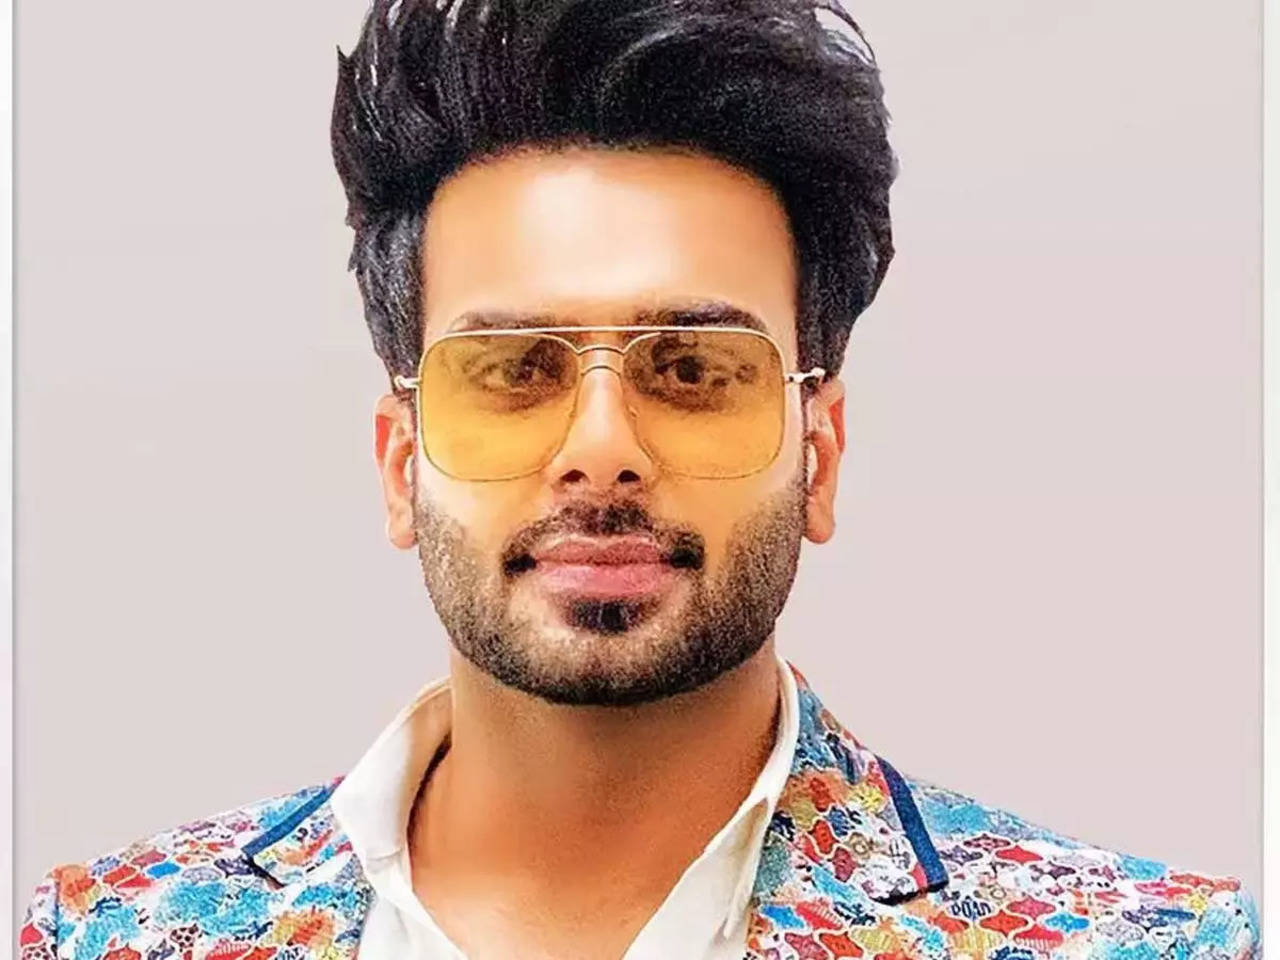 Celebrity Hairstyle of Mankirt Aulakh from Vail single 2020  Charmboard